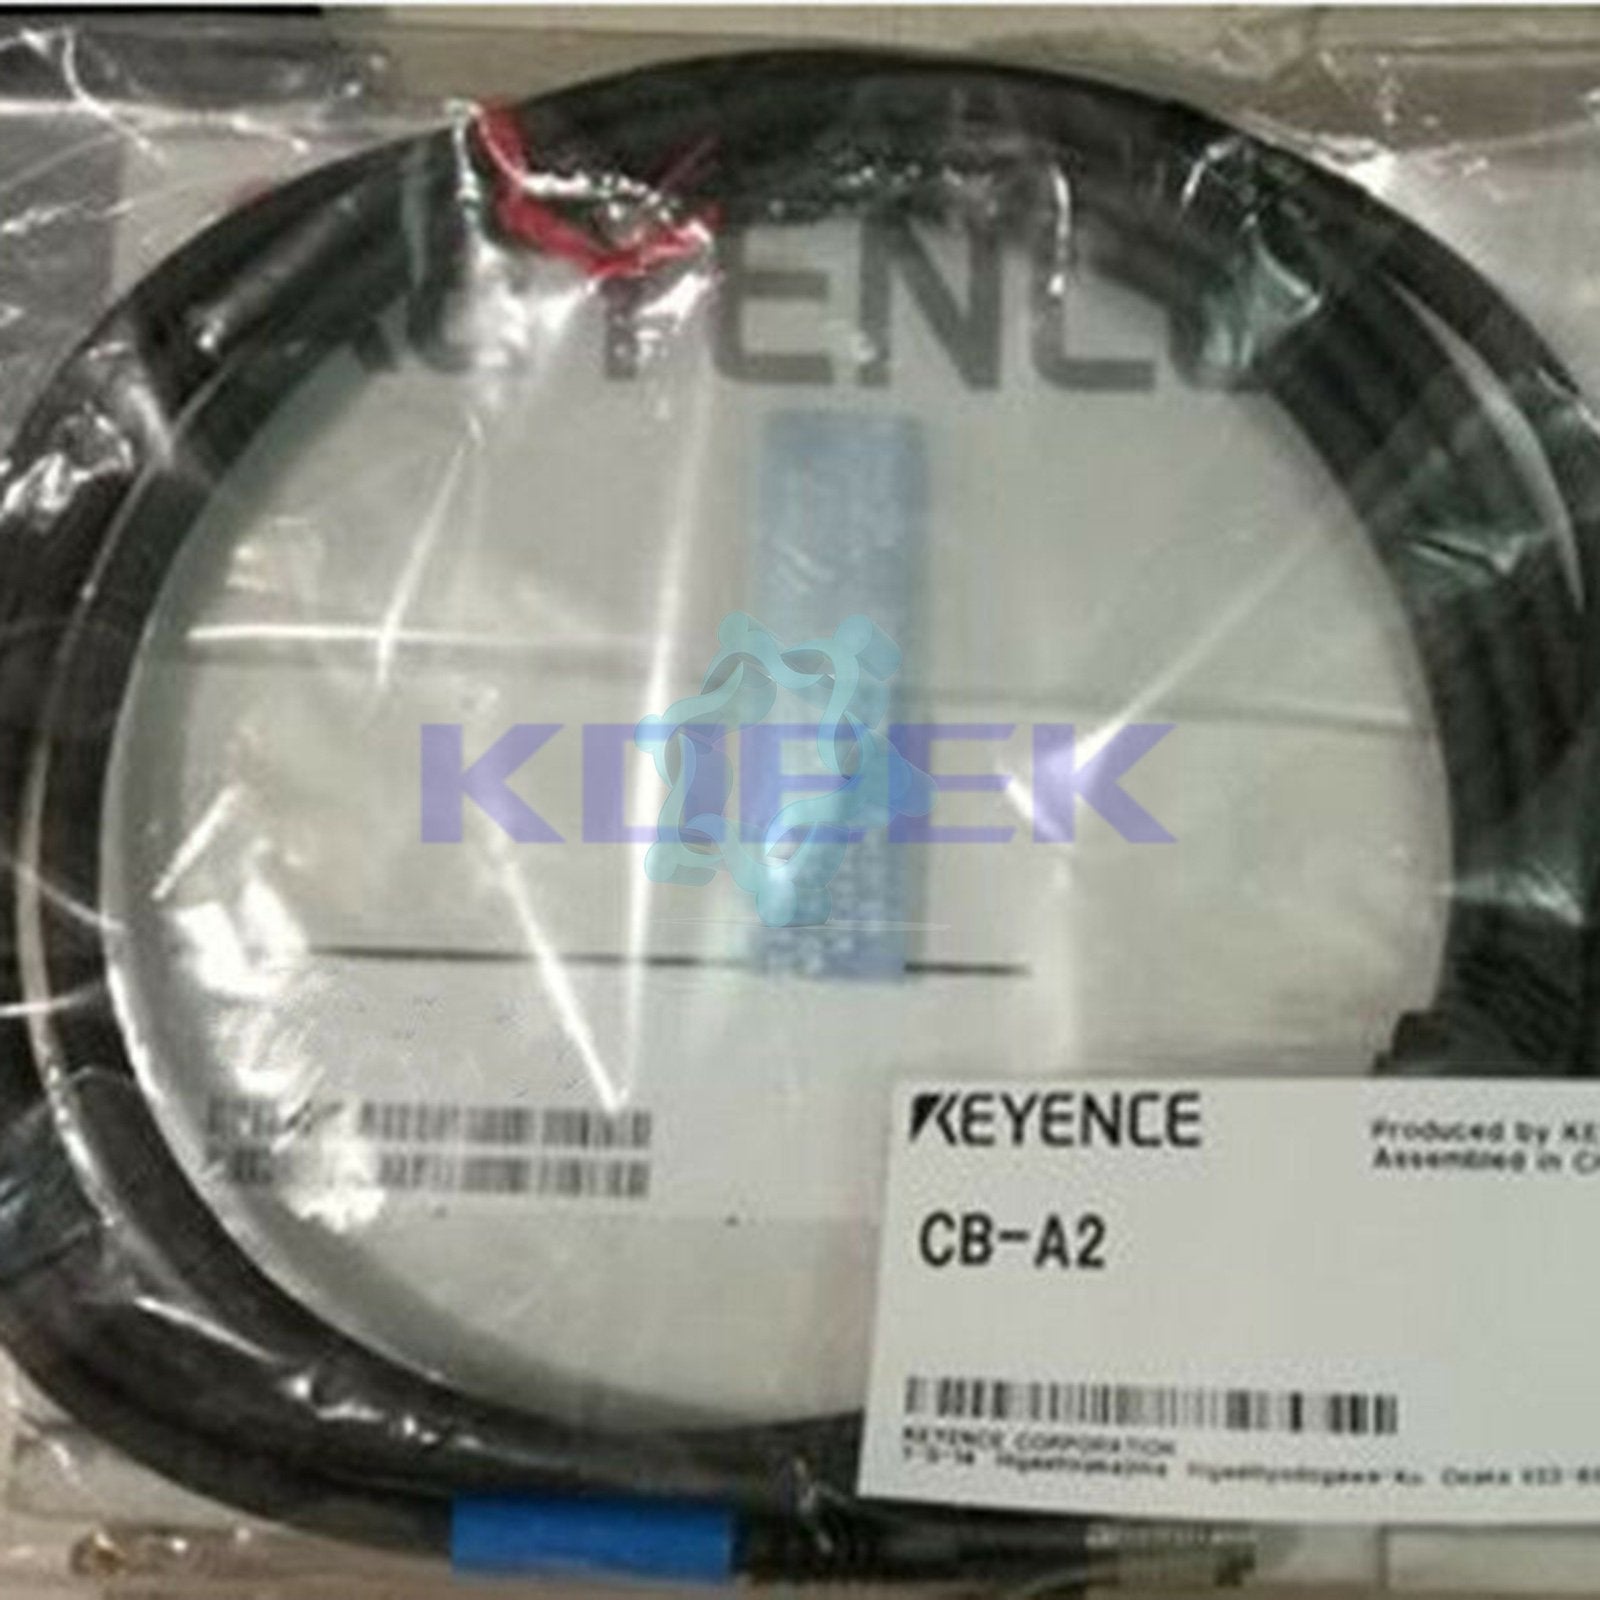 CB-A2 KOEED 201-500, import_2020_10_10_031751, Keyence, NEW, Other